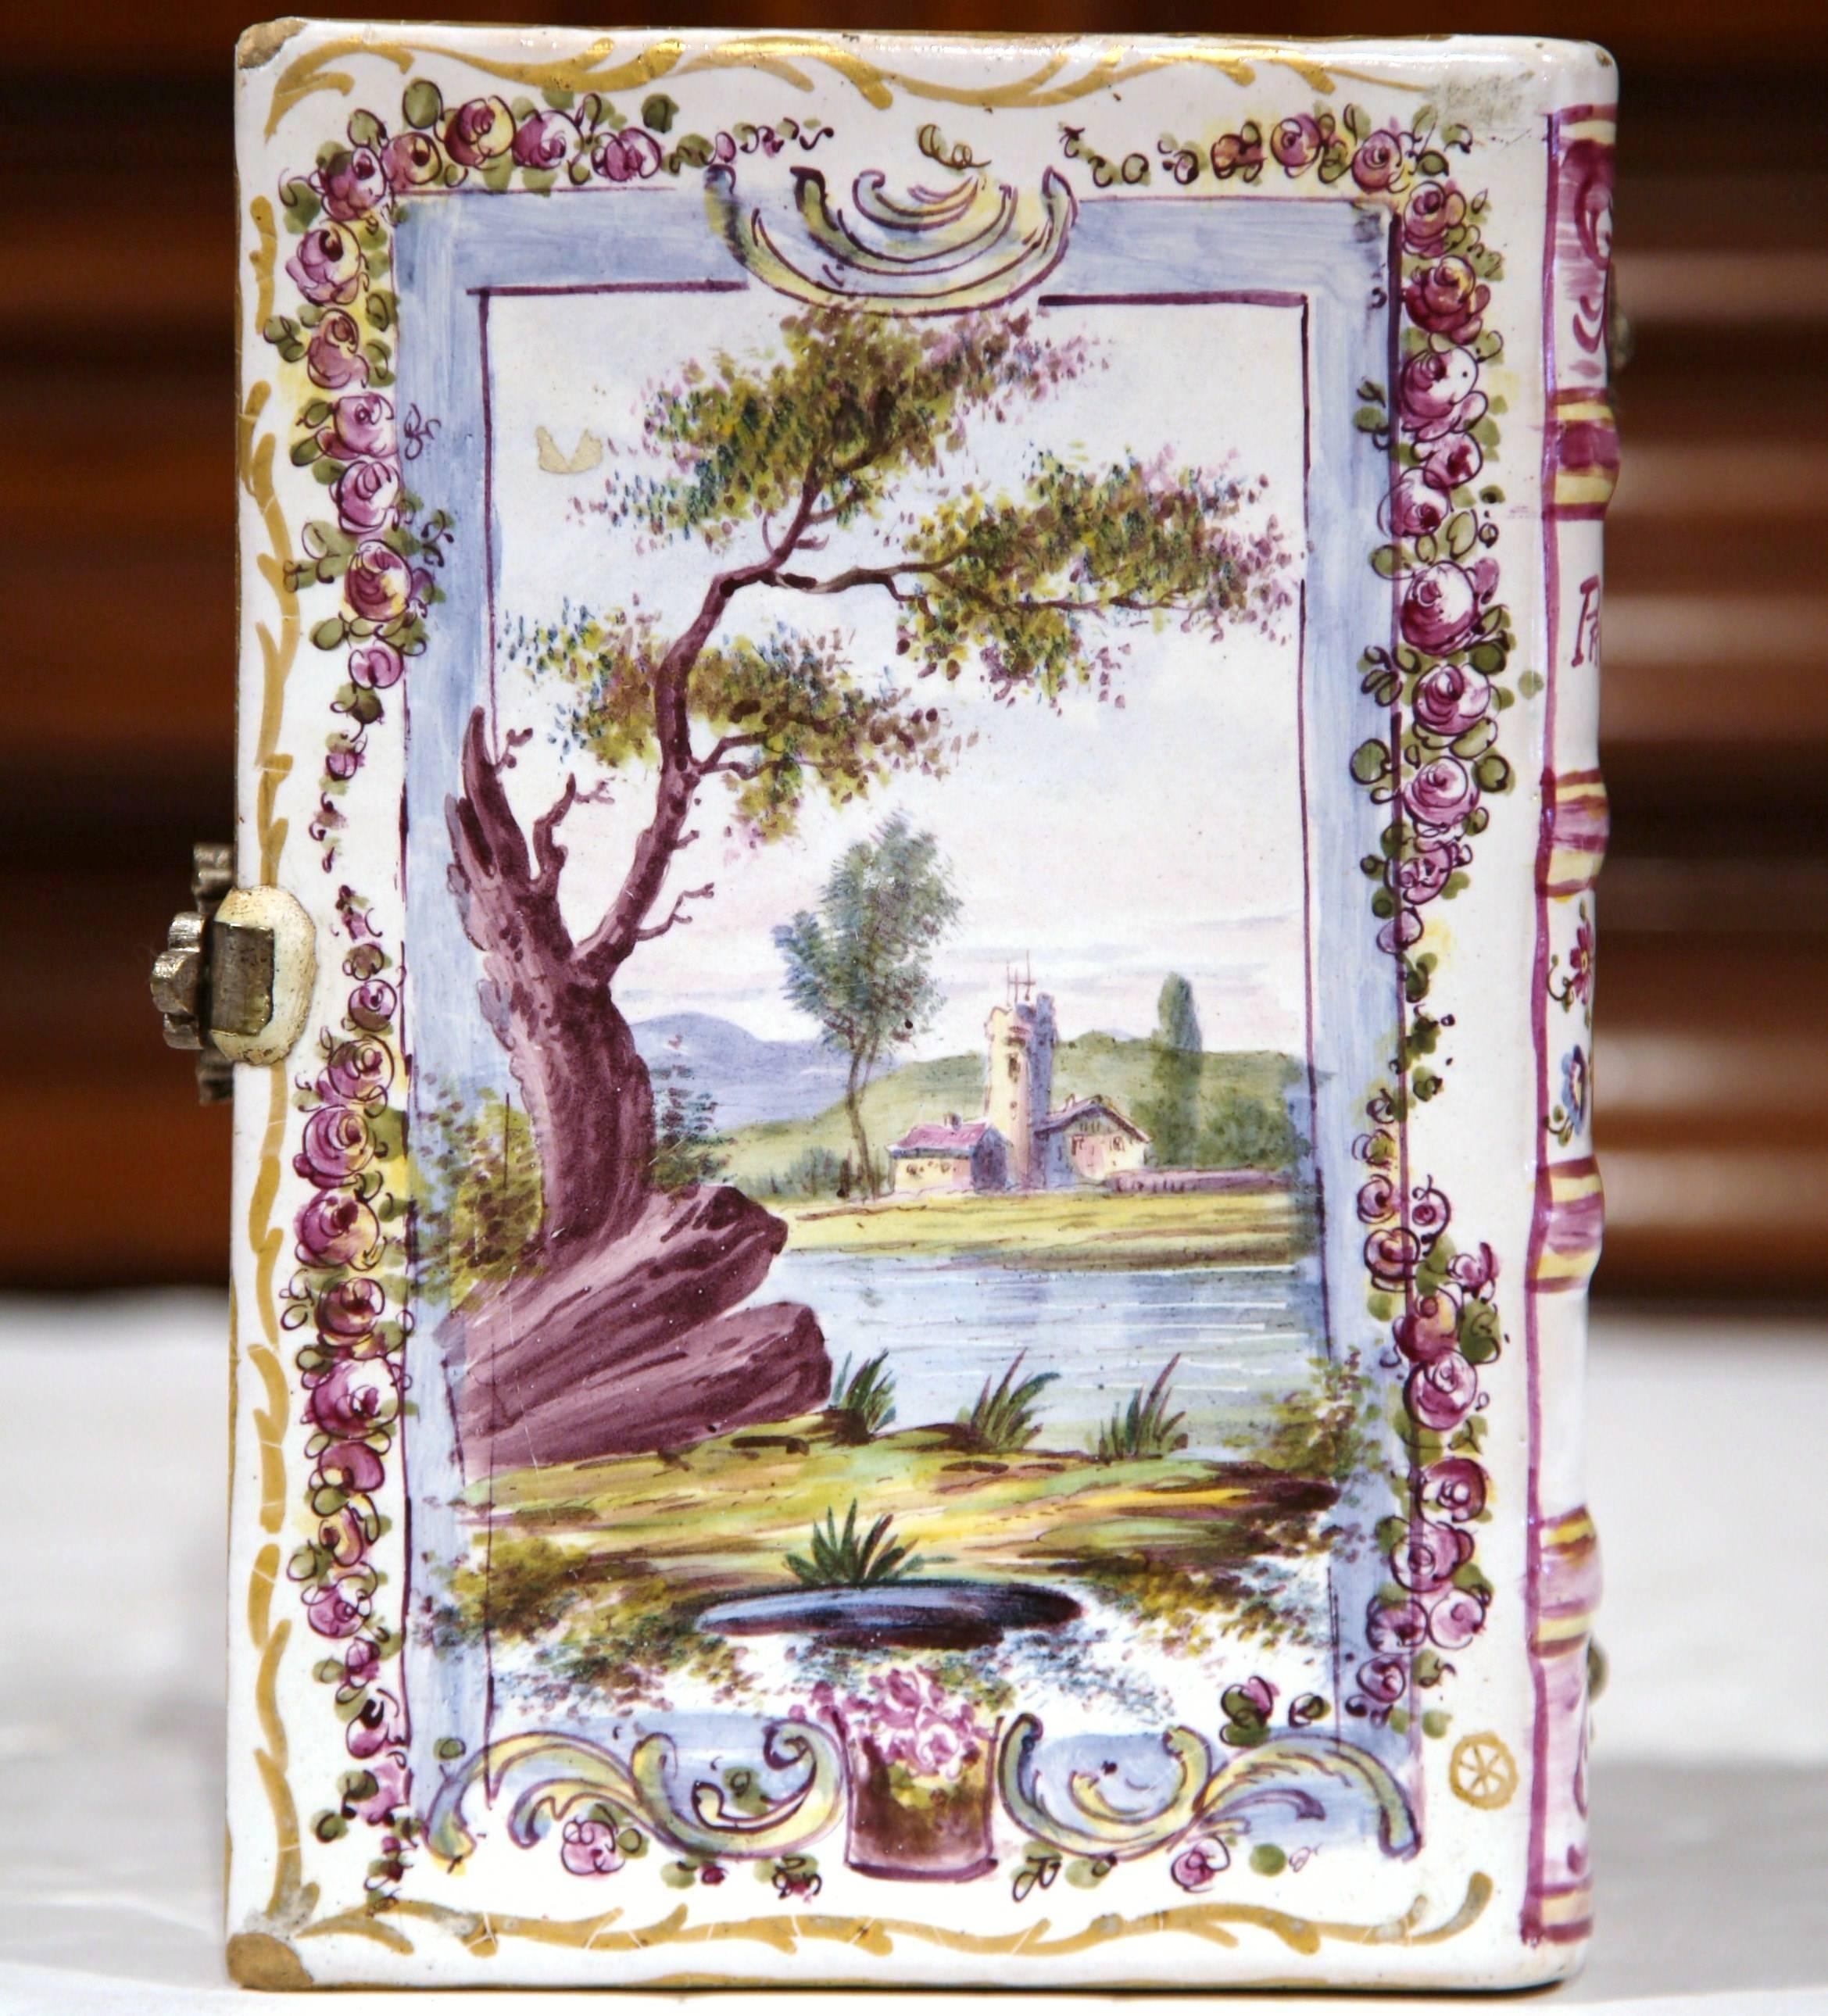 Bronze Early 19th Century French Hand-Painted Porcelain Jewelry Box Shaped as a Book